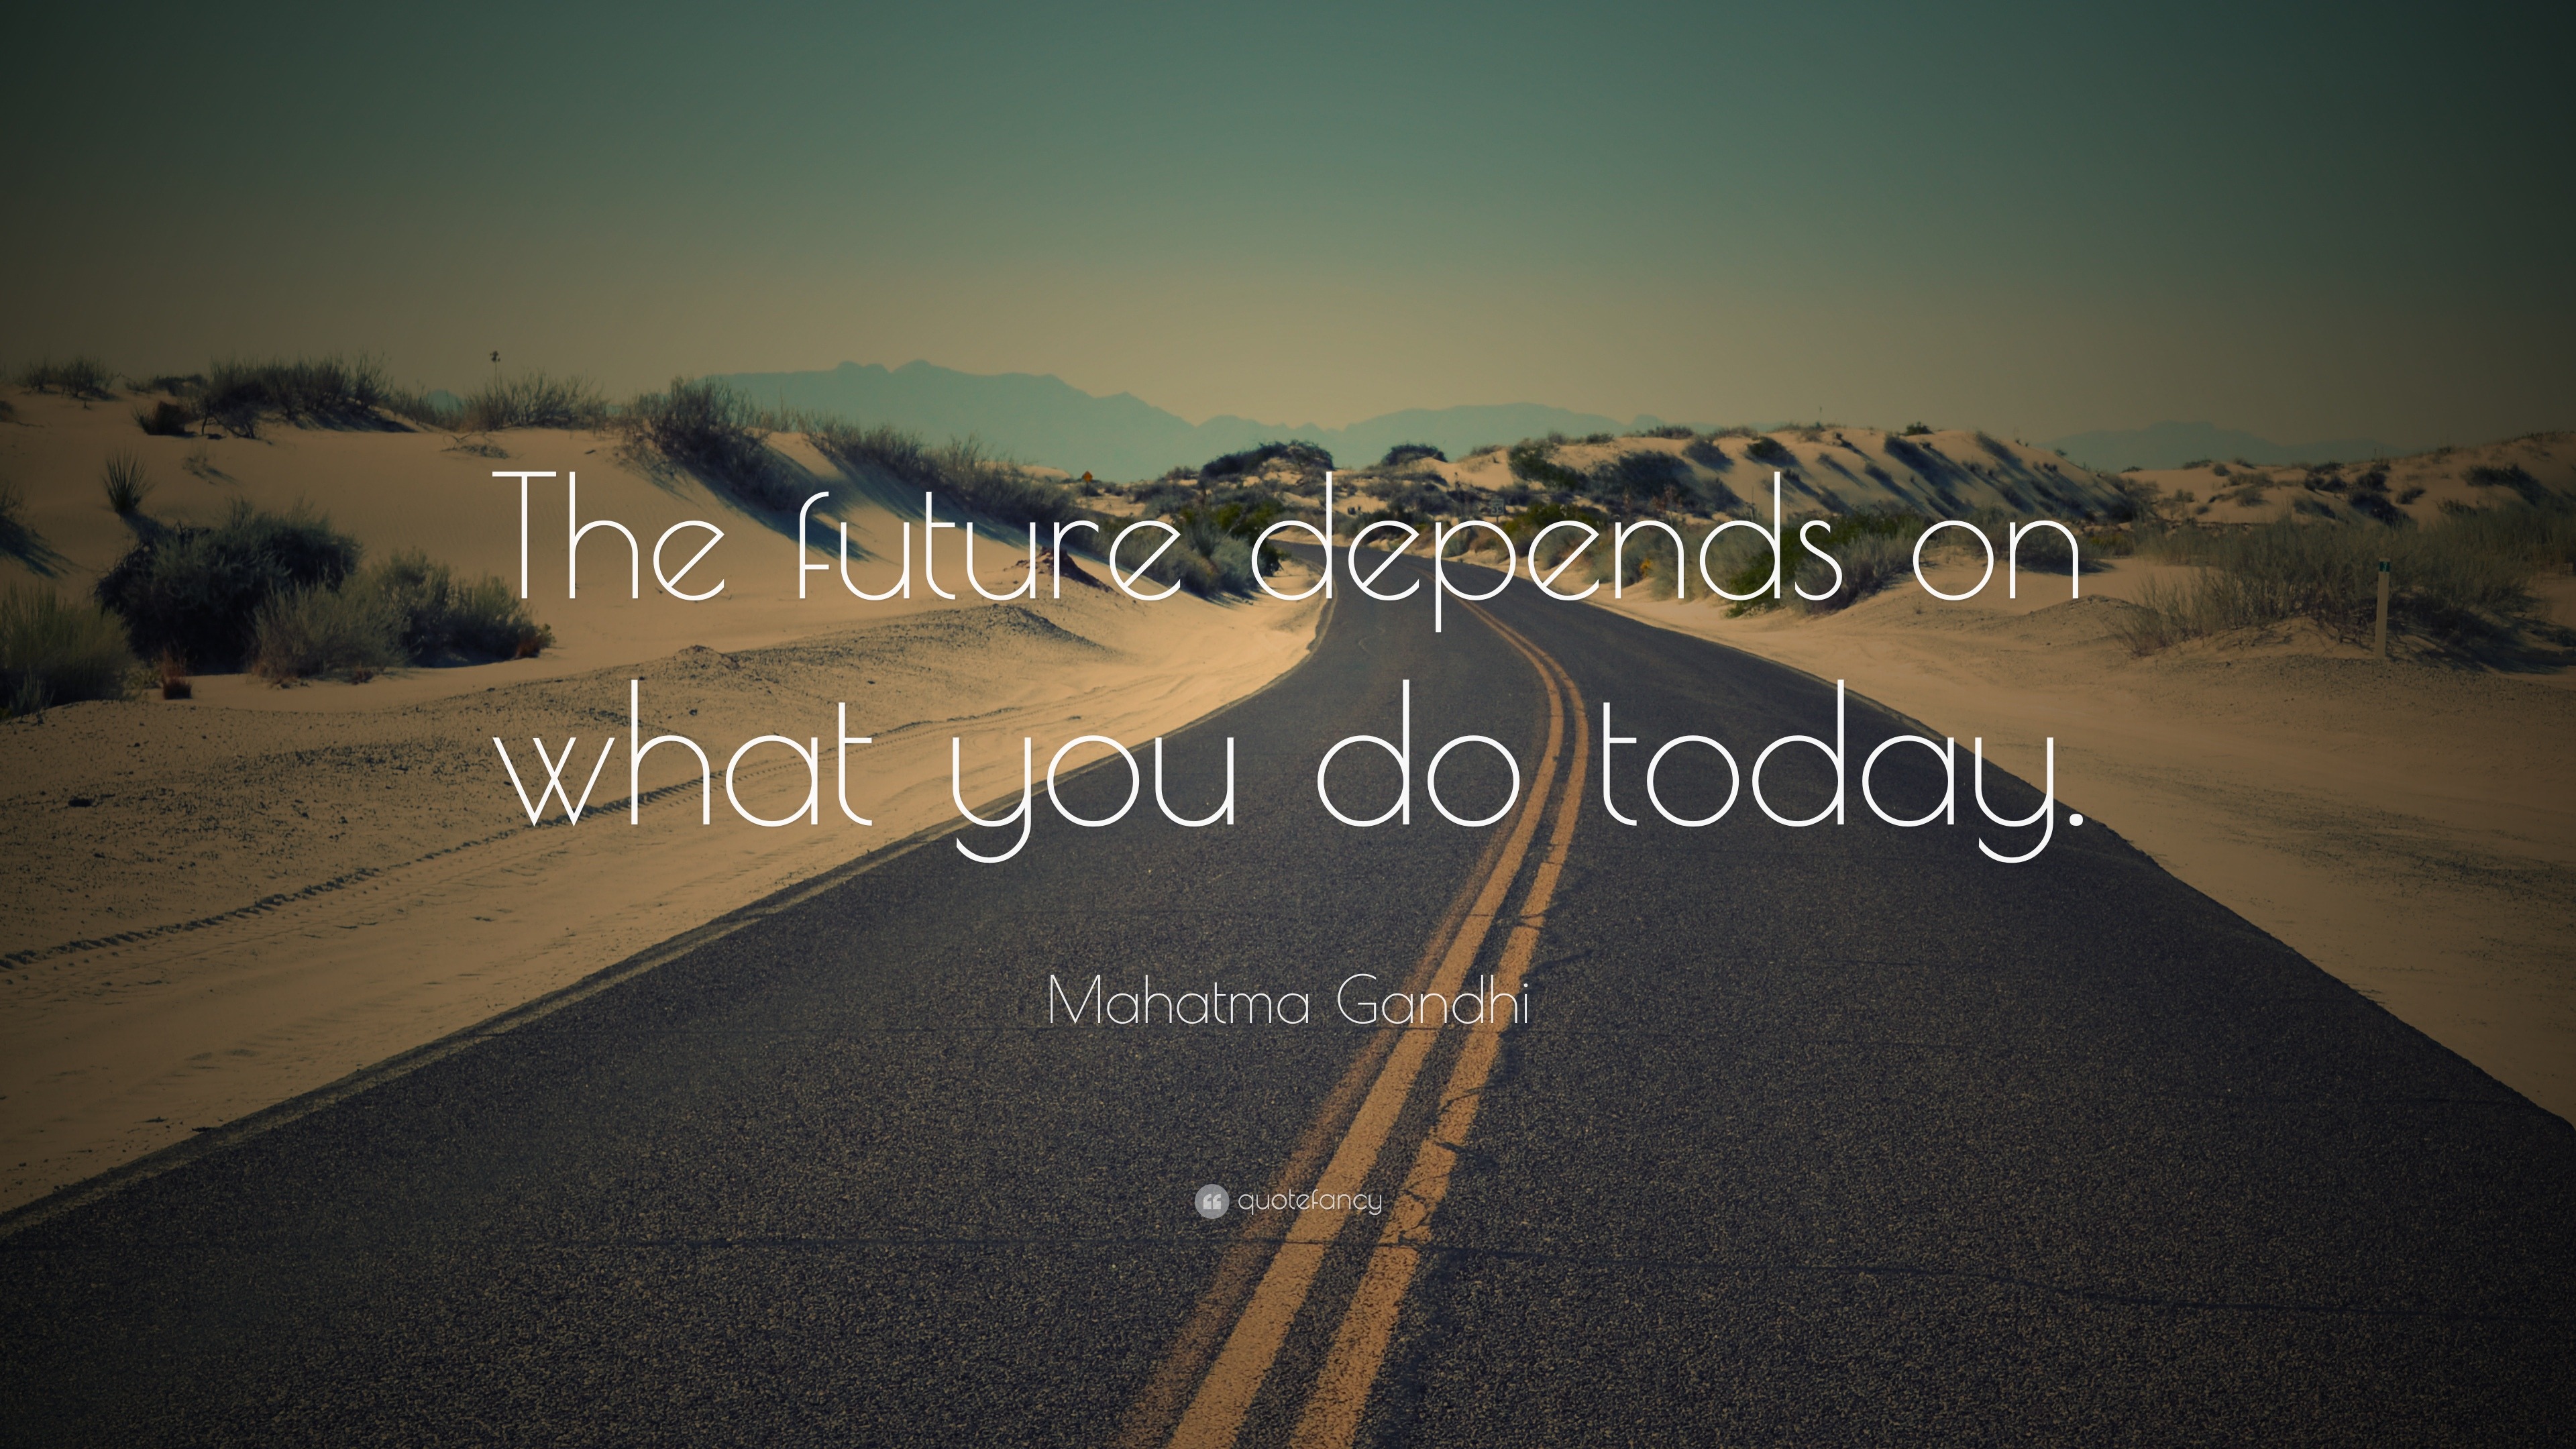 Mahatma Gandhi Quote: “The future depends on what you do today.” (31